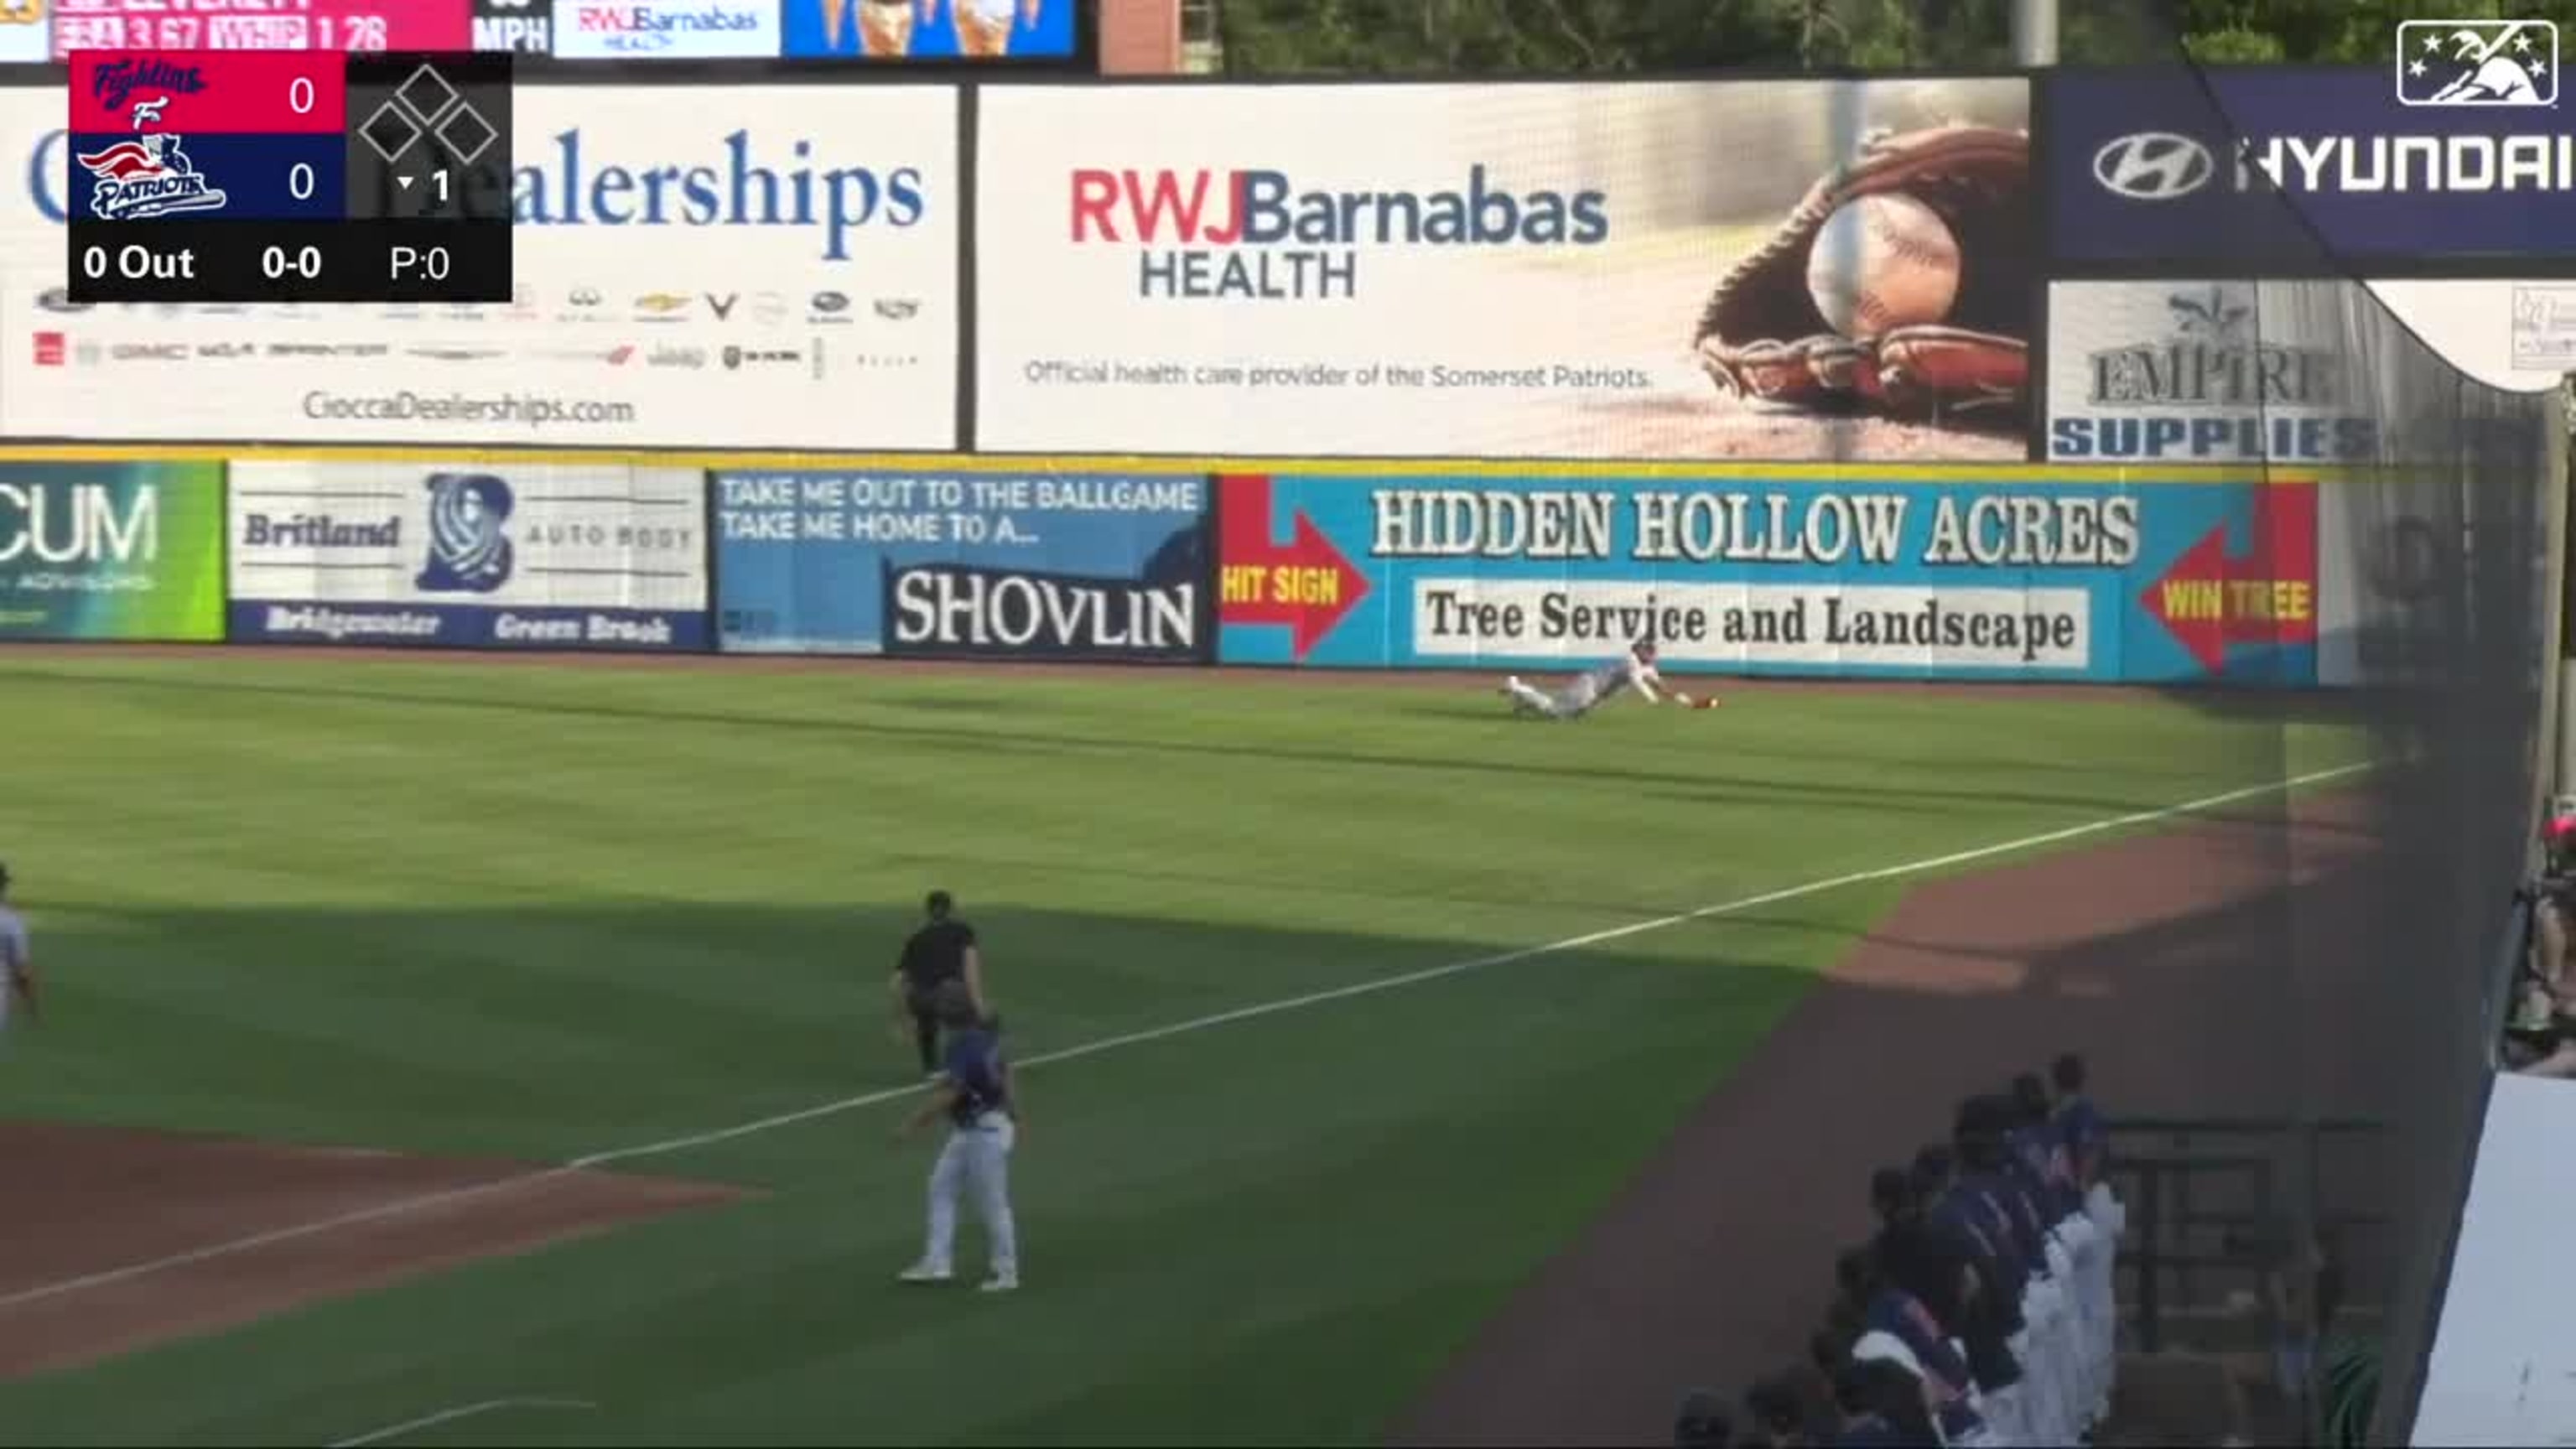 Pool Located in Outfield - Picture of Reading Fightin Phils